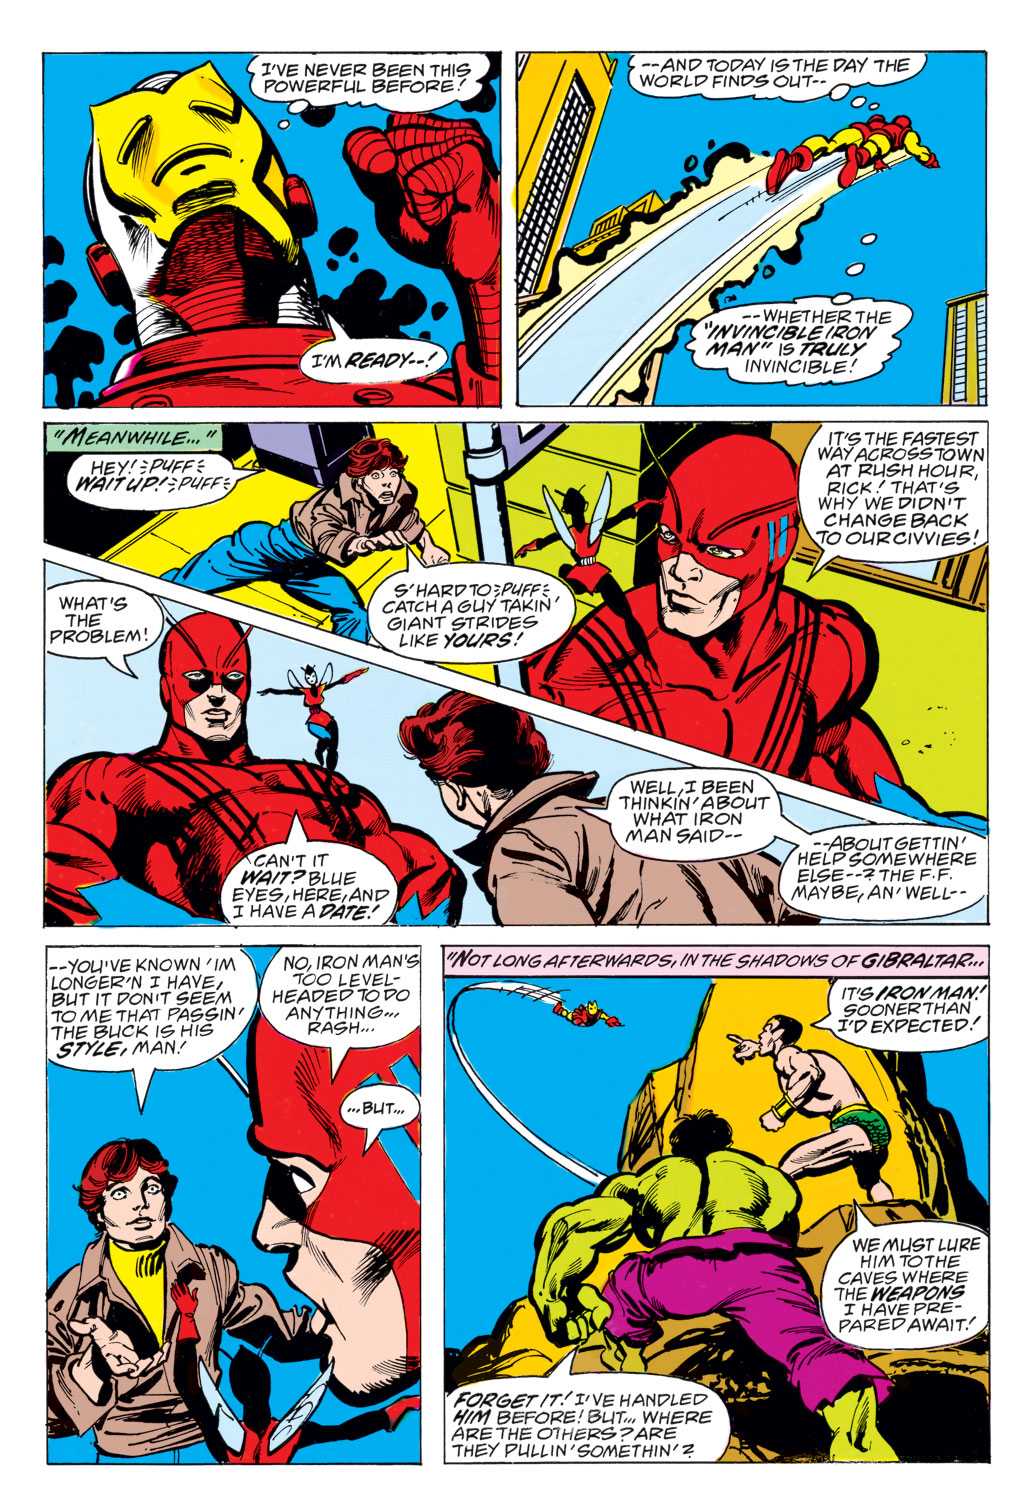 What If? (1977) issue 3 - The Avengers had never been - Page 16